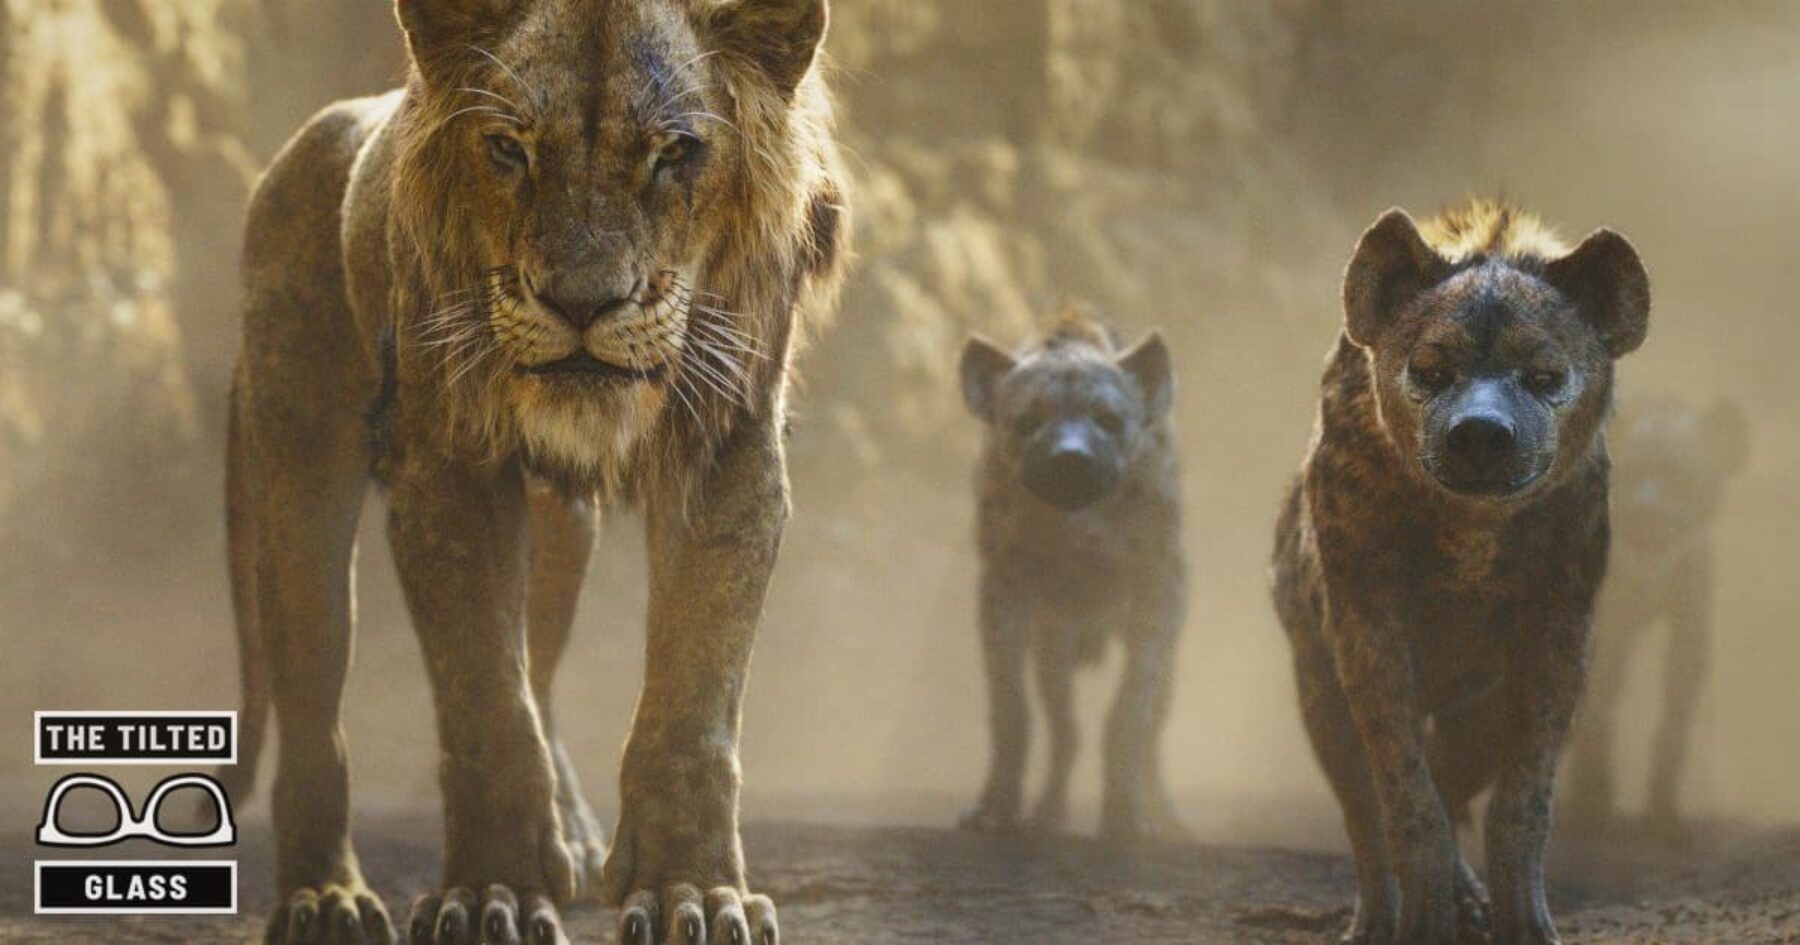 New Lion King Scandalously Used Human Voices for Hyenas